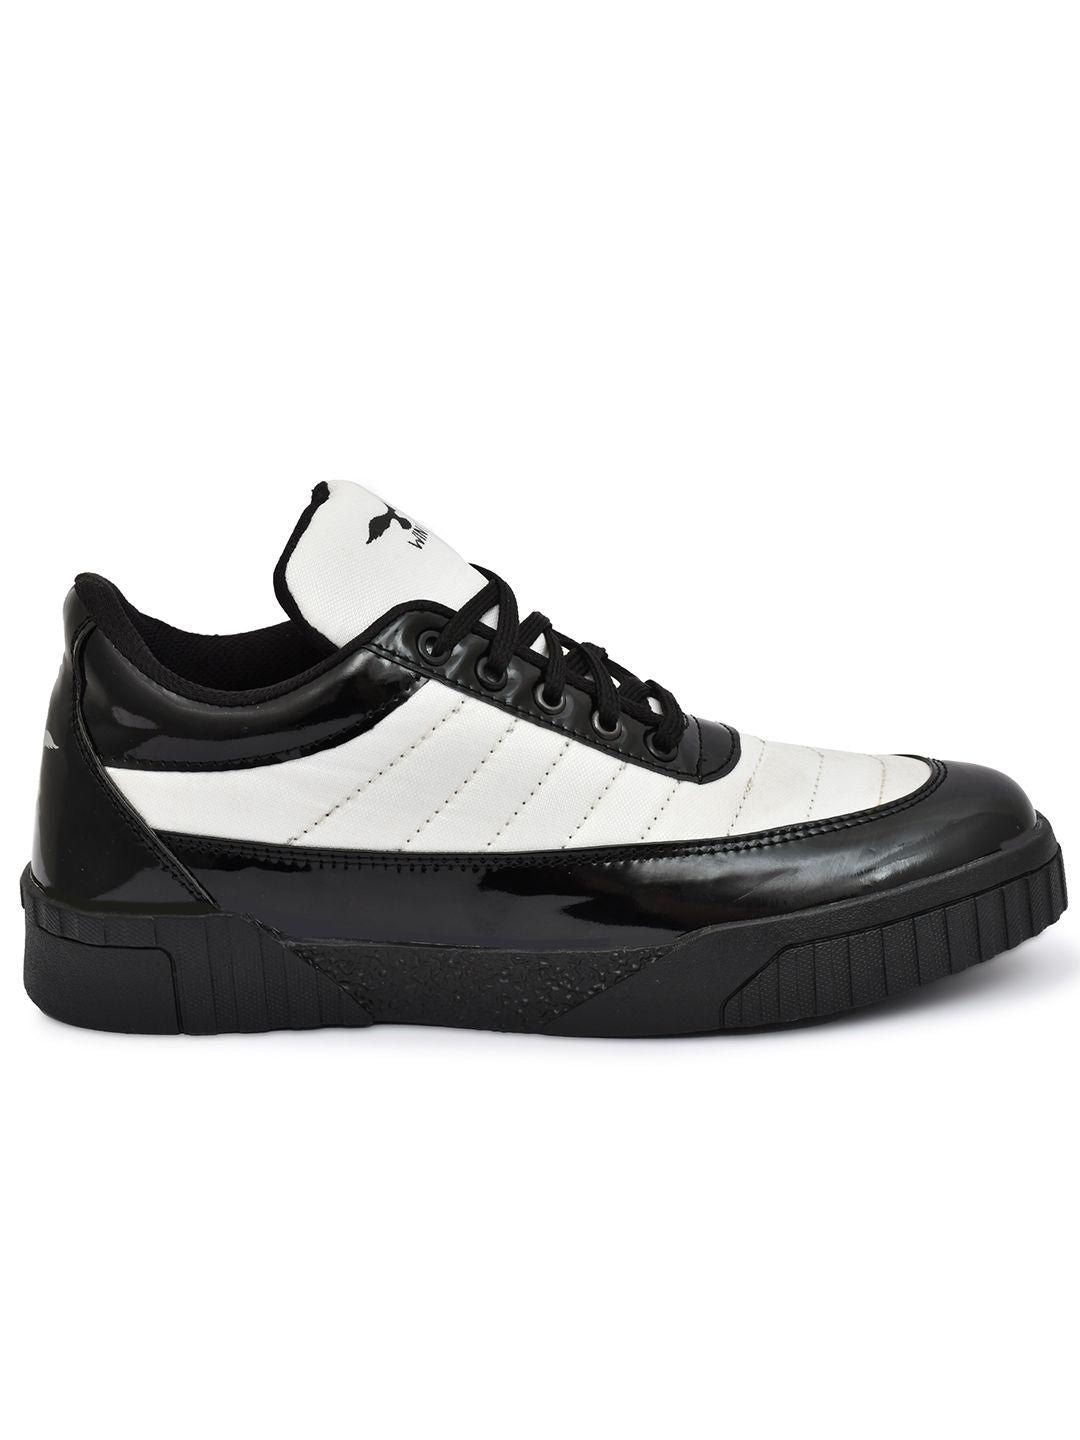 WIN9 Casual Sneakers Black Outdoor Shoes For Boys And Men